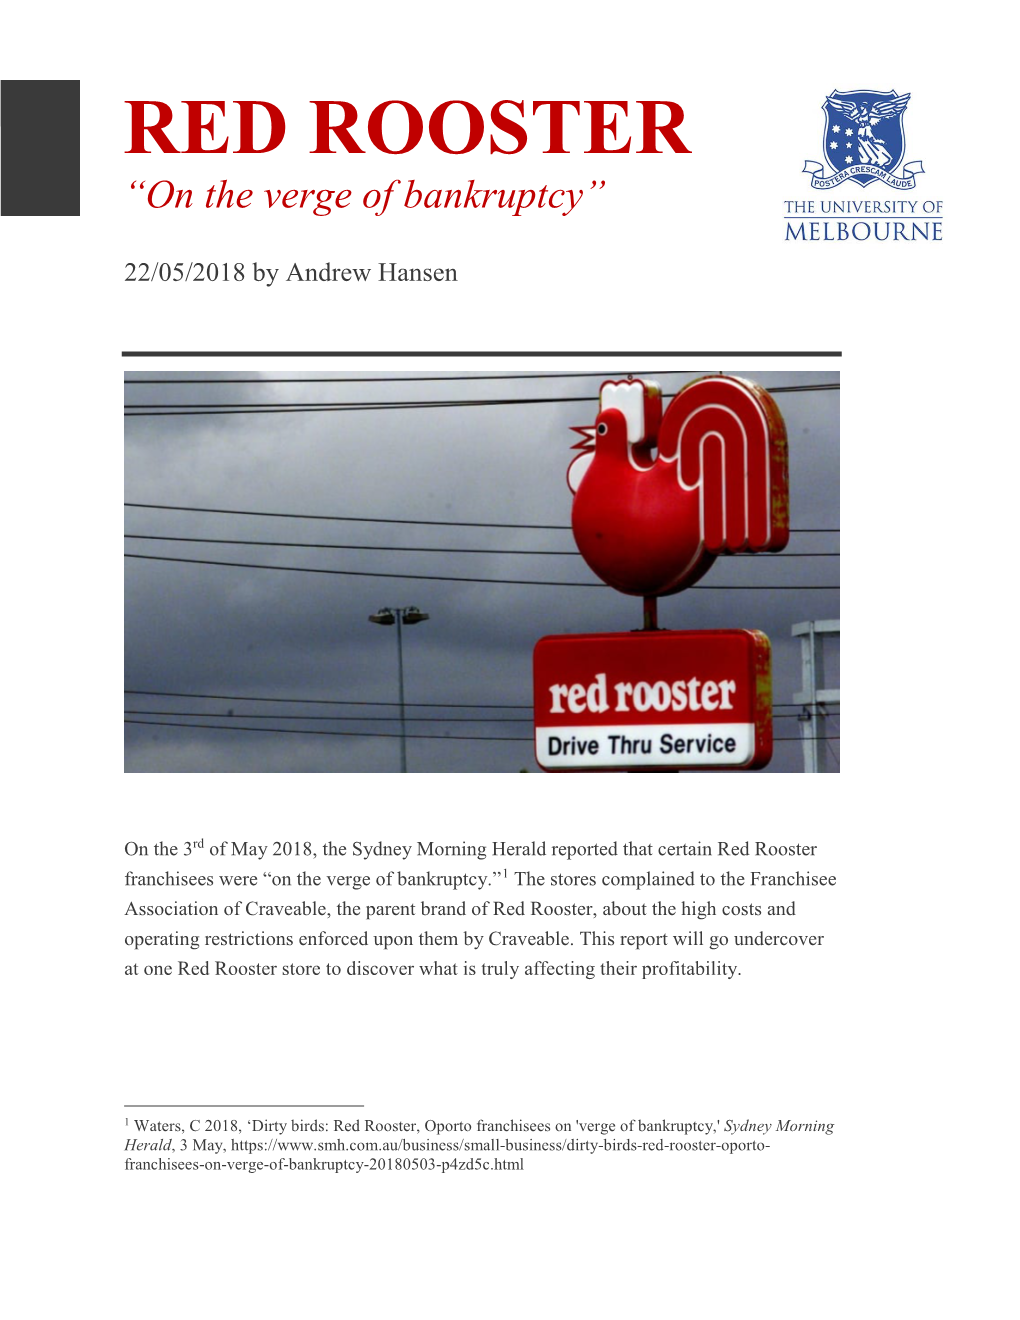 RED ROOSTER “On the Verge of Bankruptcy”